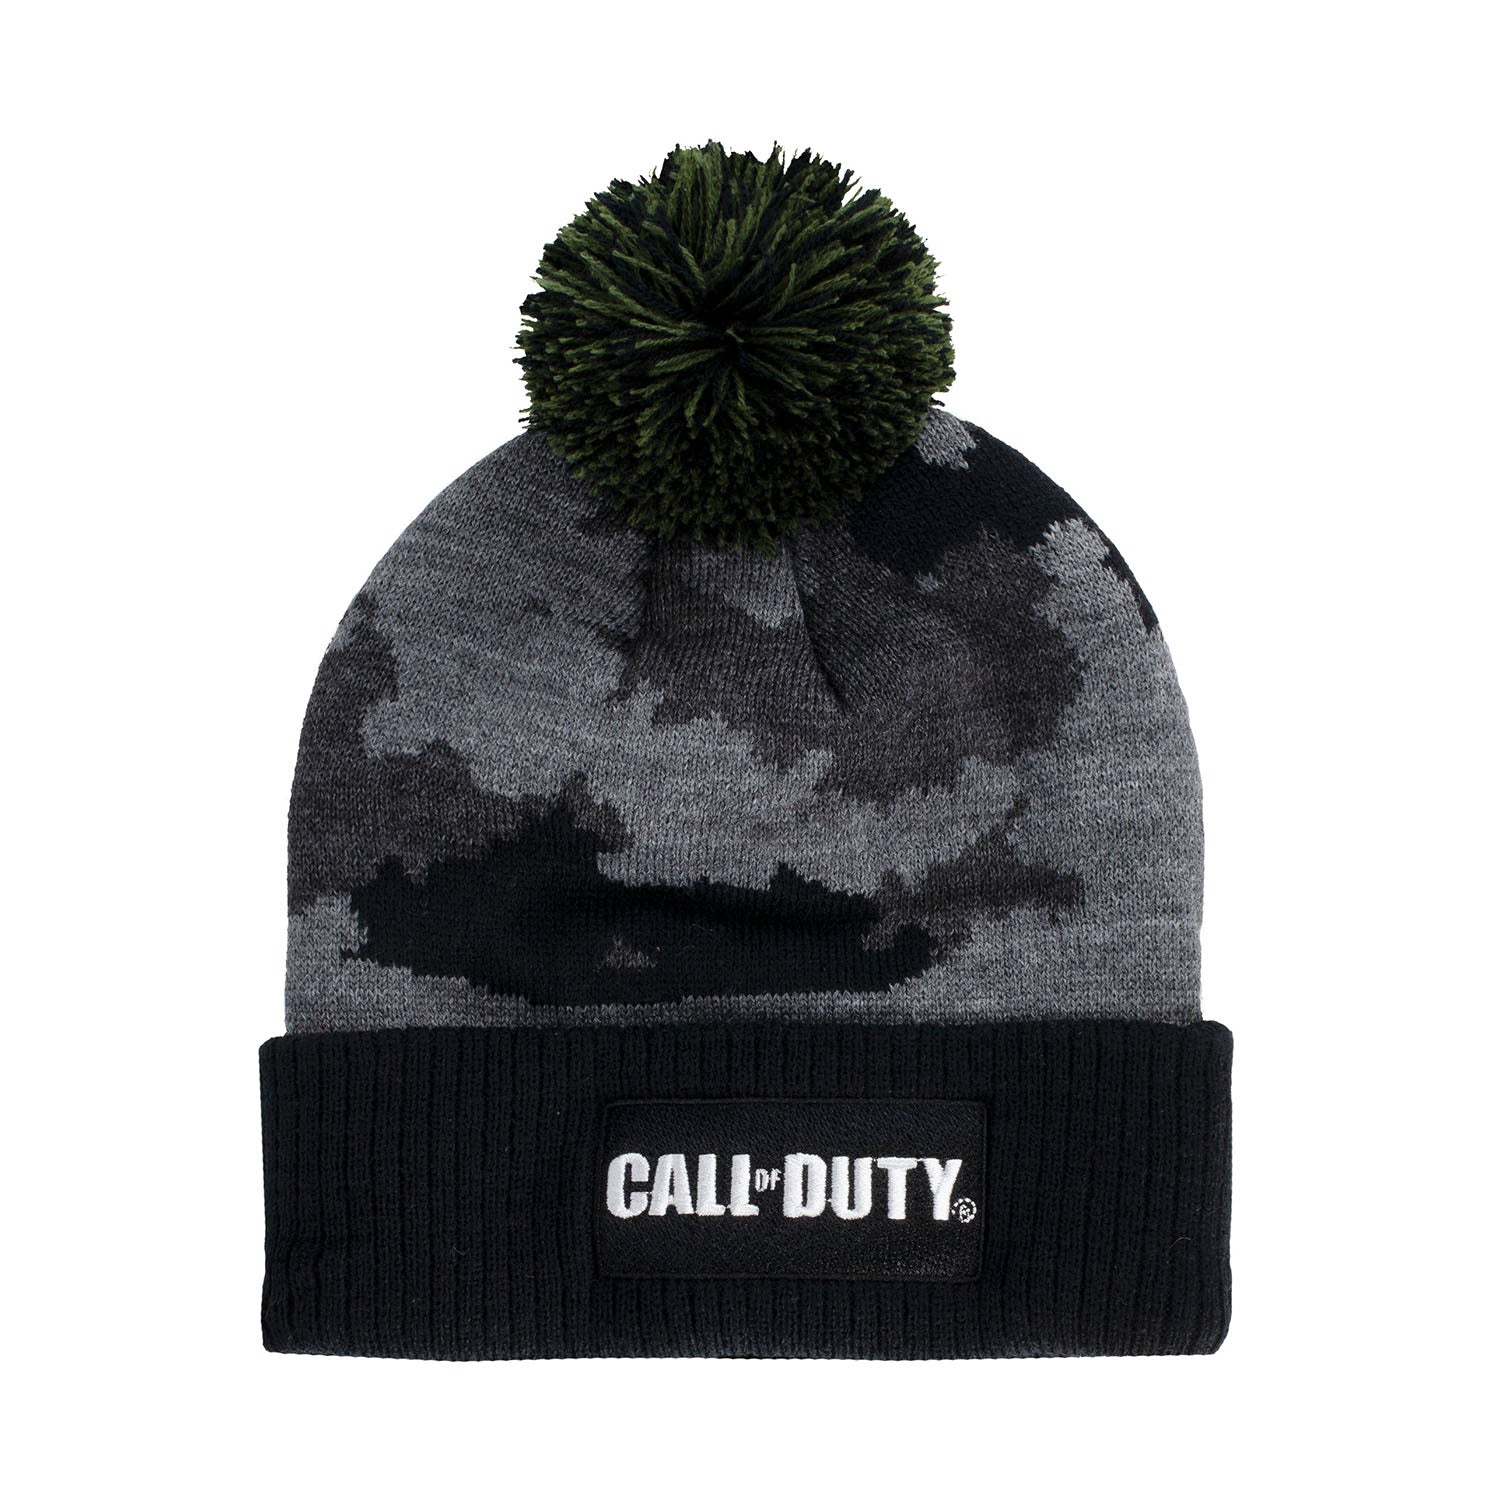 Call of Grey Camo Beanie - Call of Store